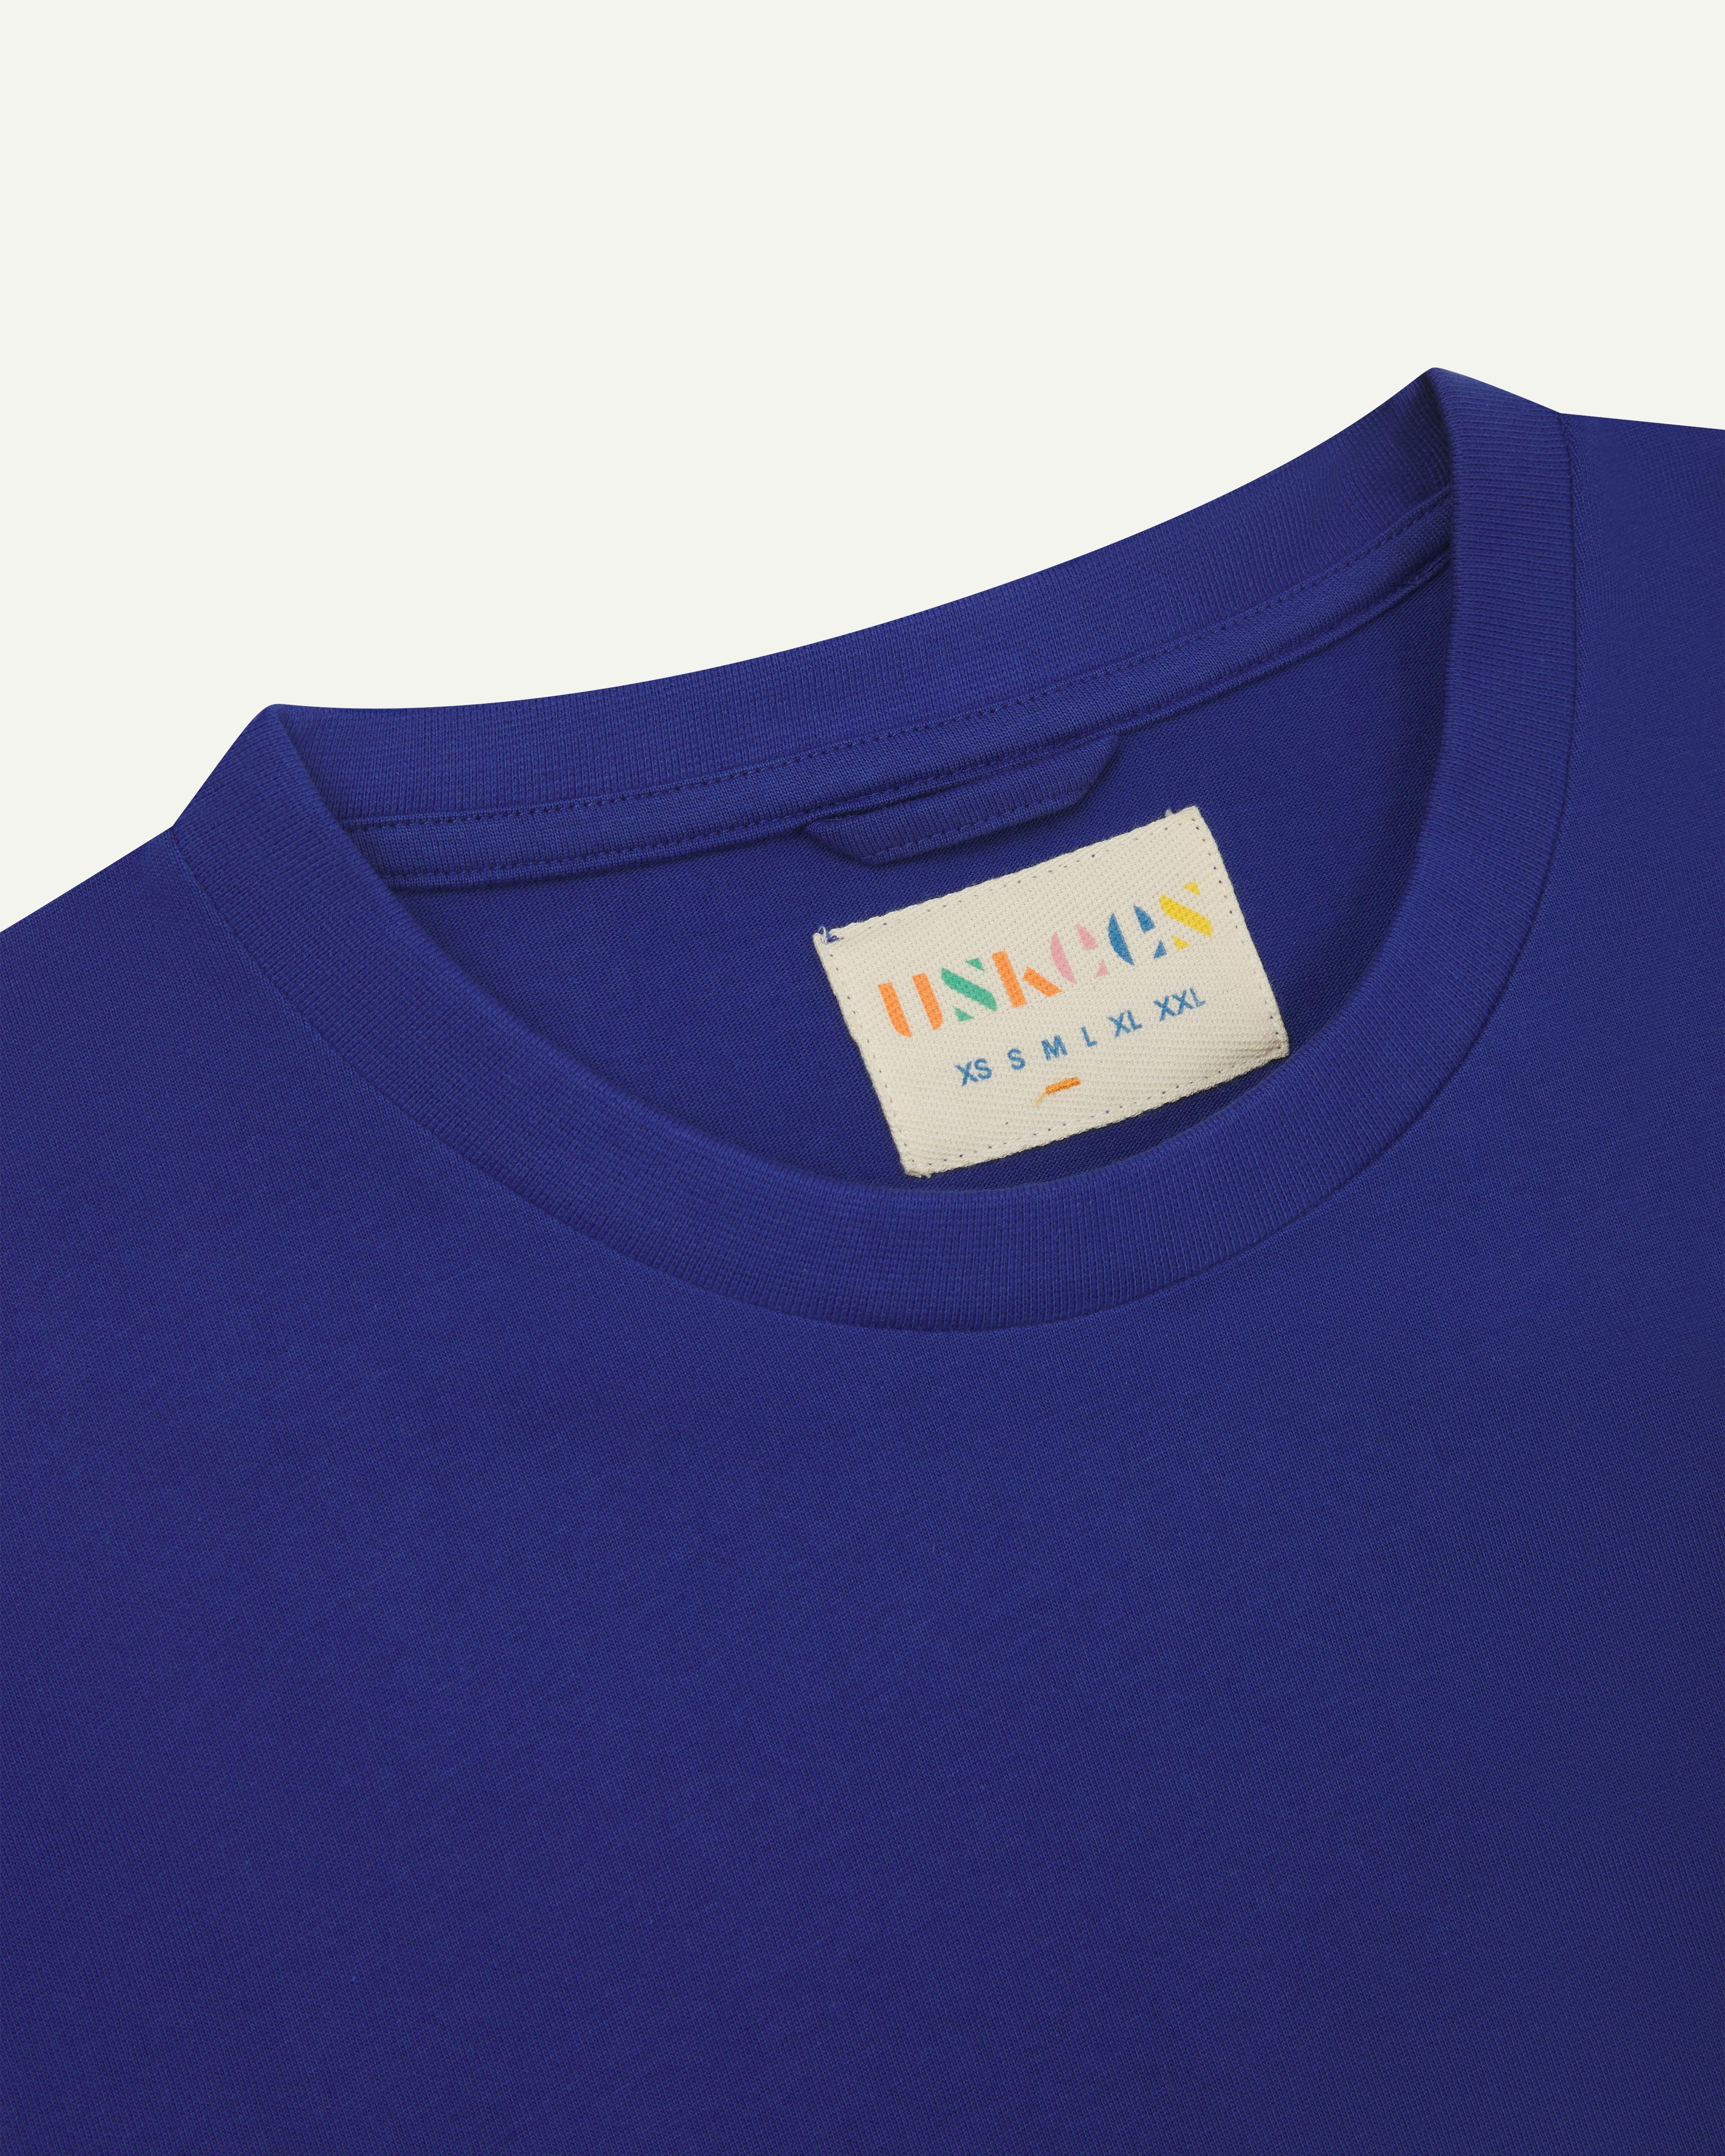 Front close-up view of uskees #7006 men's short sleeve T-shirt in bright blue showing the brand/size label at neck.